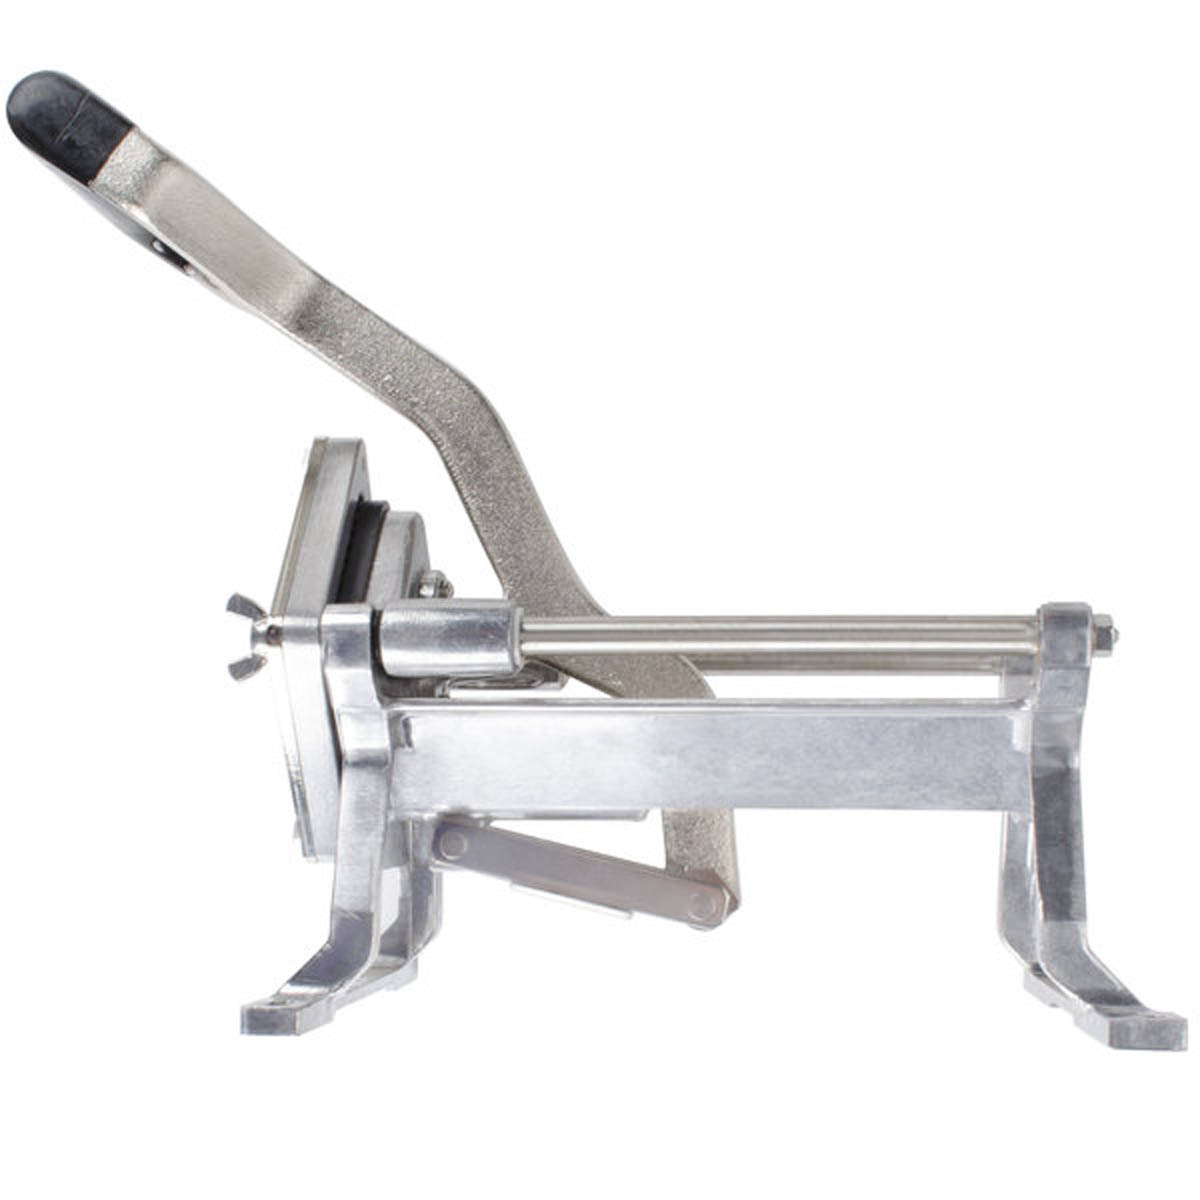 Nemco 55450-3 French Fry Cutter